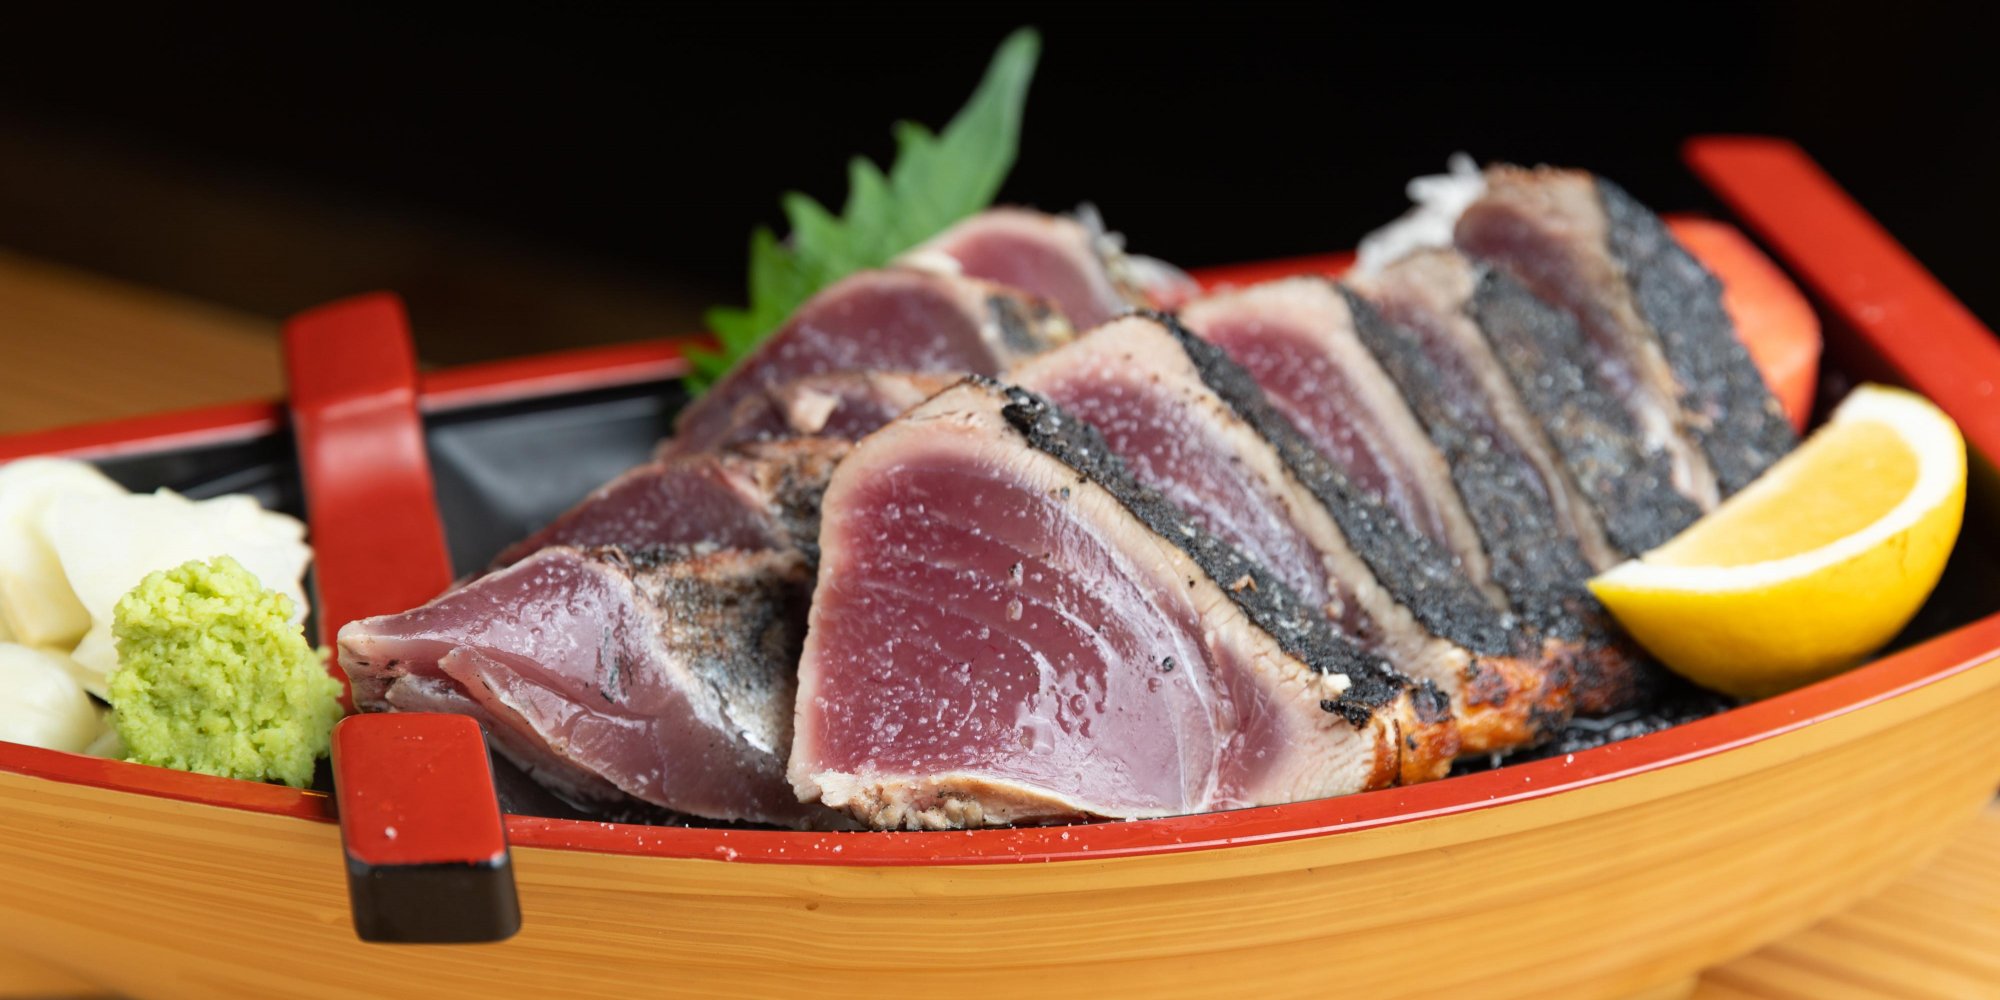 Katsuo bonito tuna eaten raw is the seafood flavor of May in Japan!